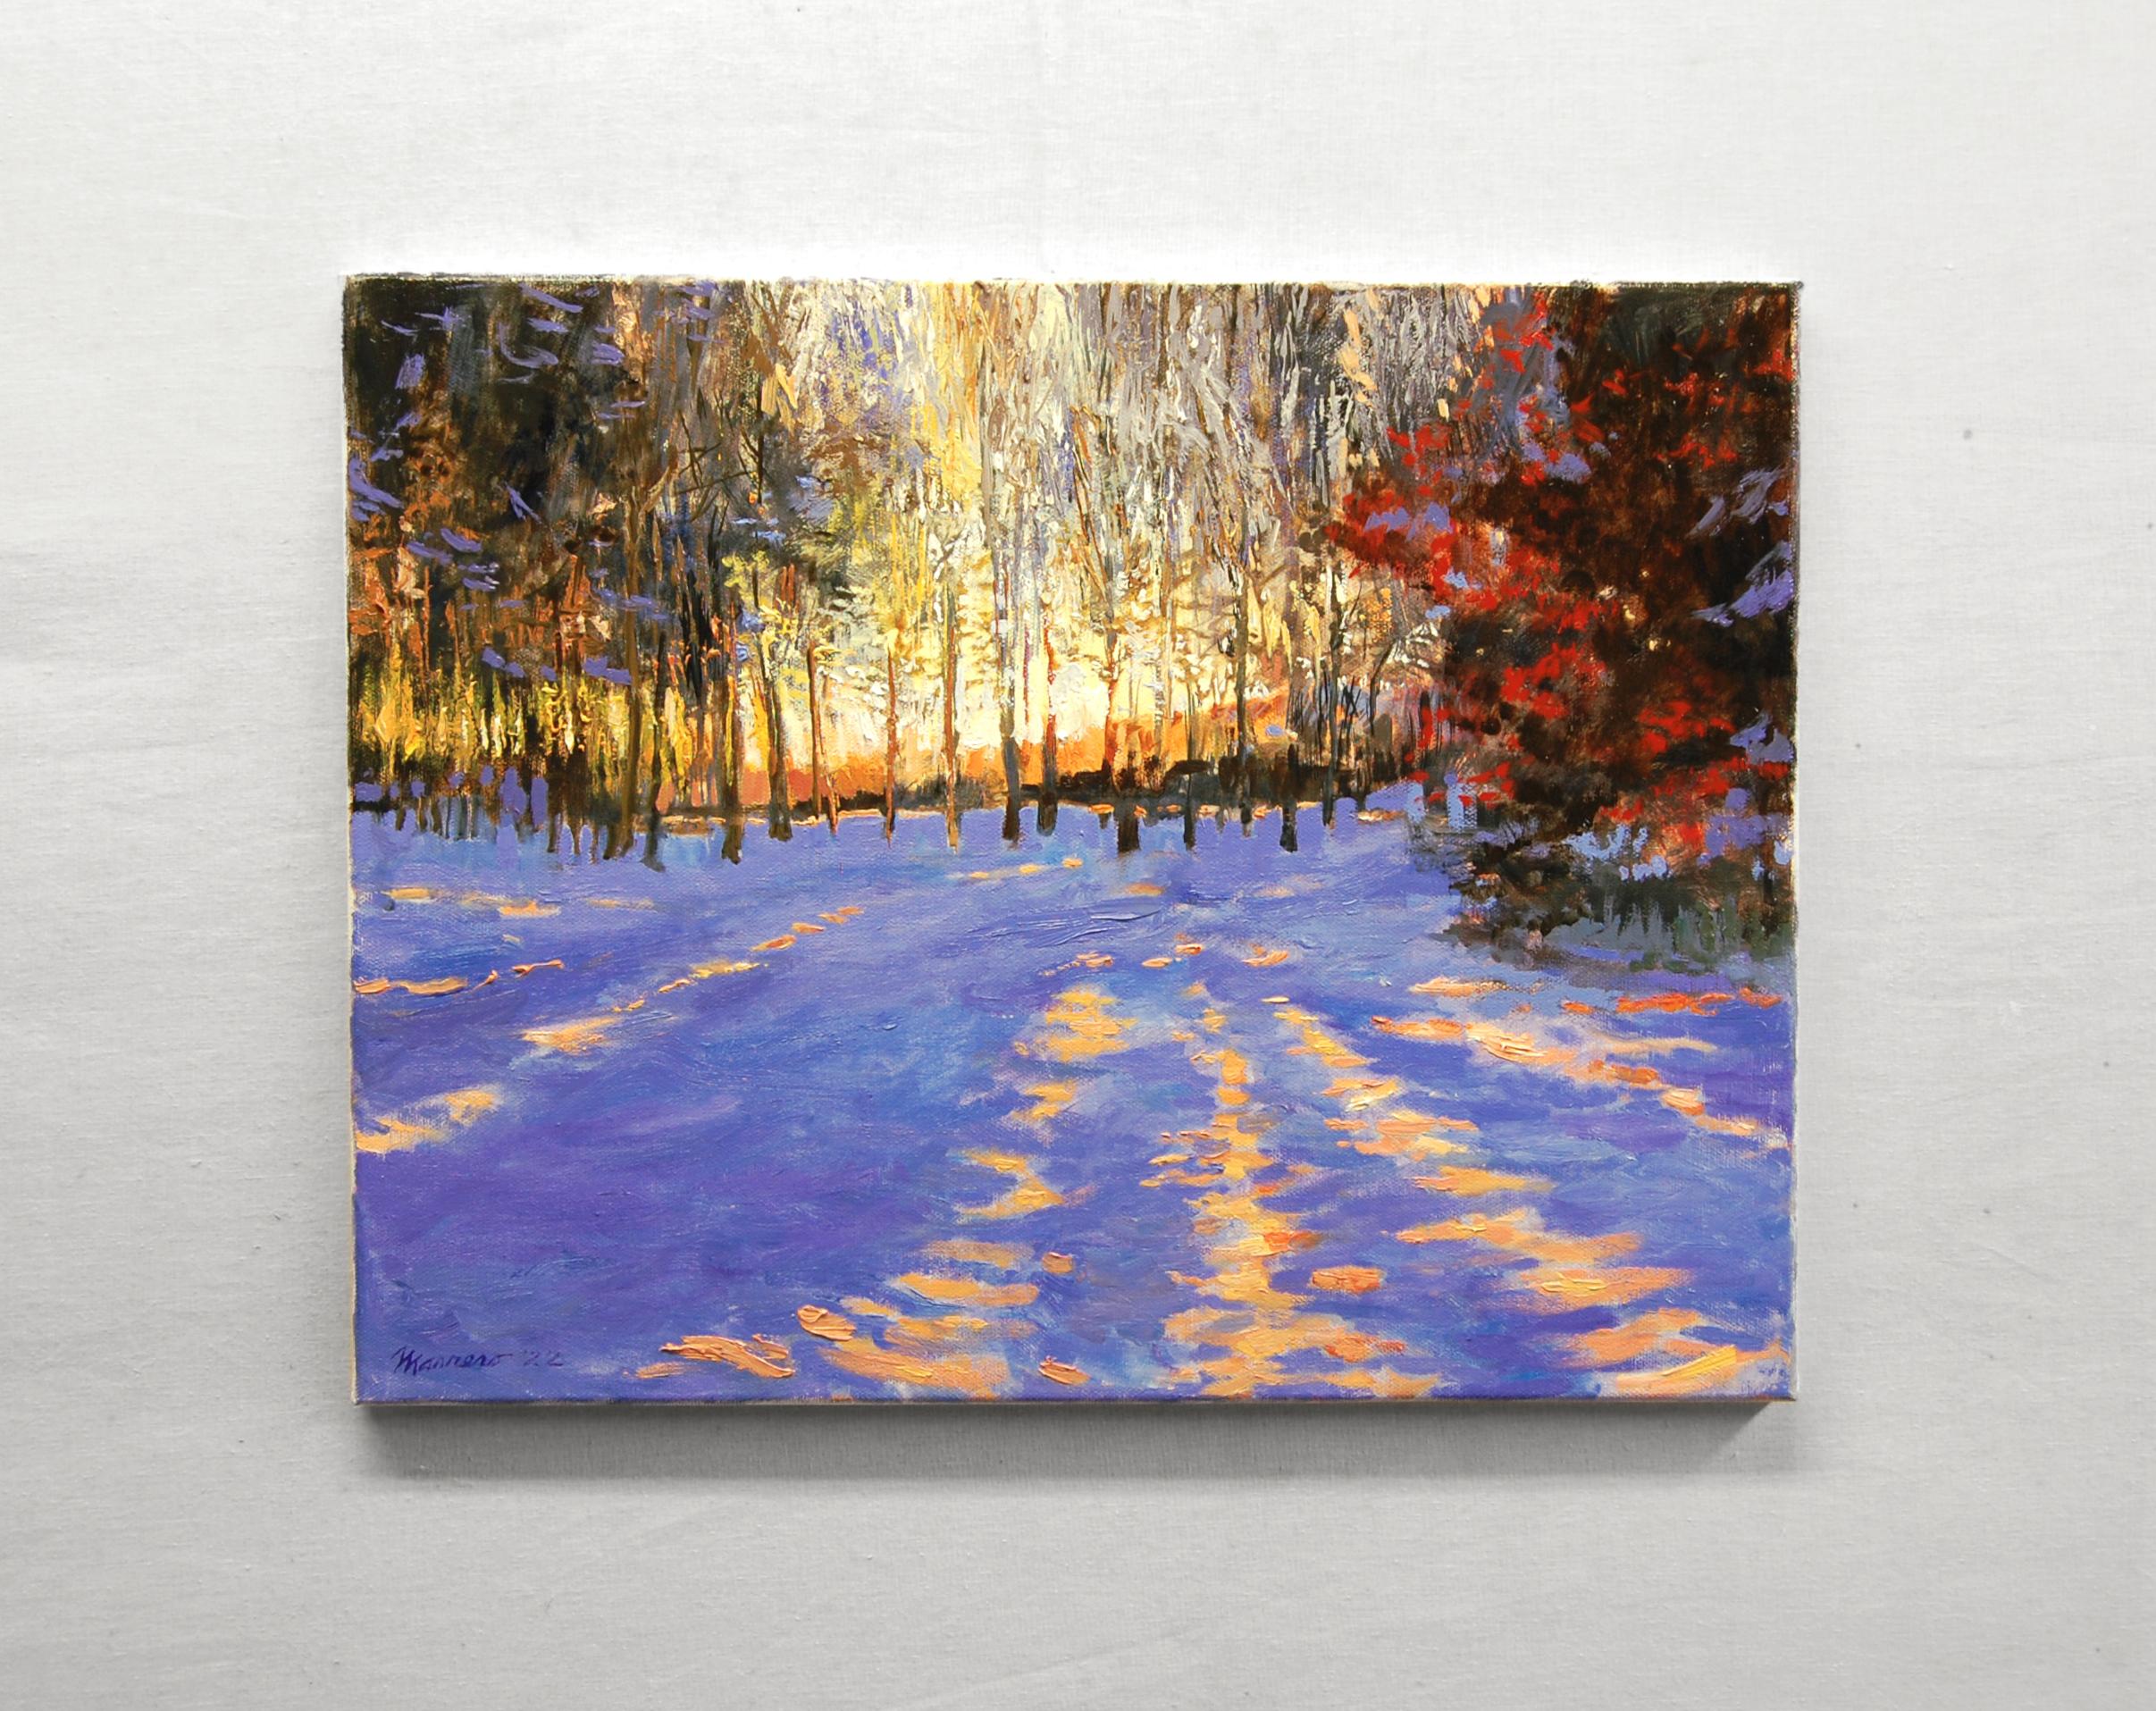 <p>Artist Comments<br>Artist Onelio Marrero captures this scene of a sunset's effects on a snow-covered trail near his home in northern New Jersey. The rich colors and textures of this painting, rendered in sensitive yet bold strokes, reflect the